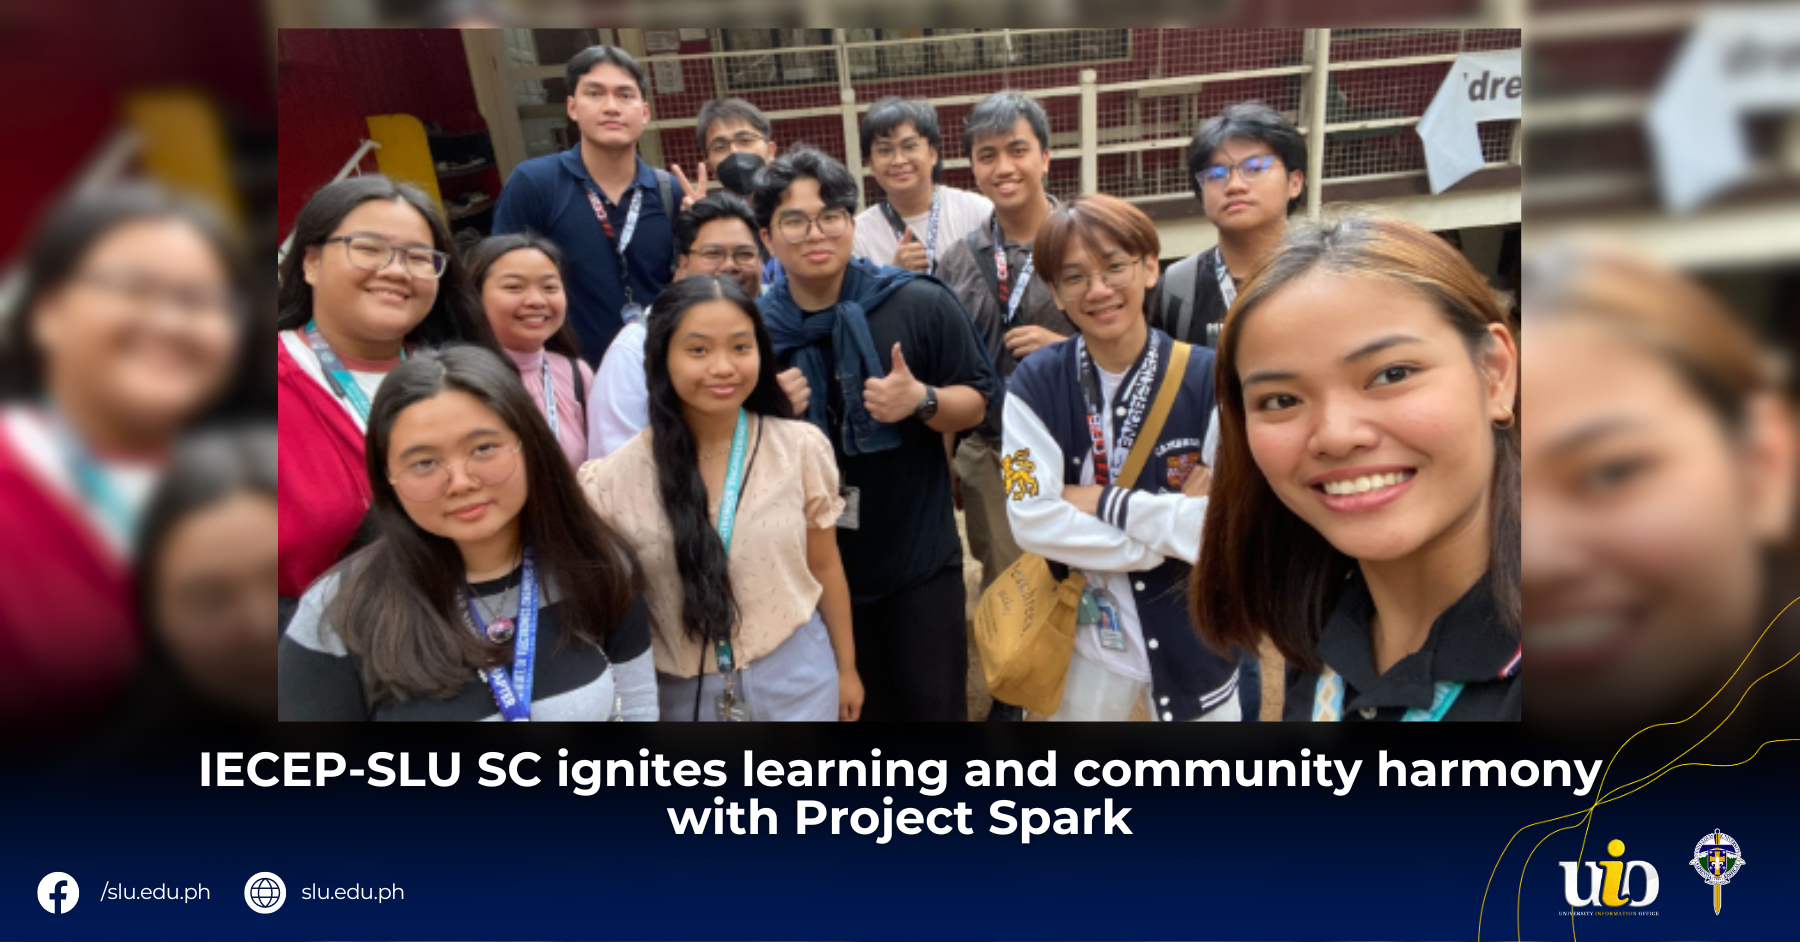 IECEP-SLU SC ignites learning and community harmony with Project Spark